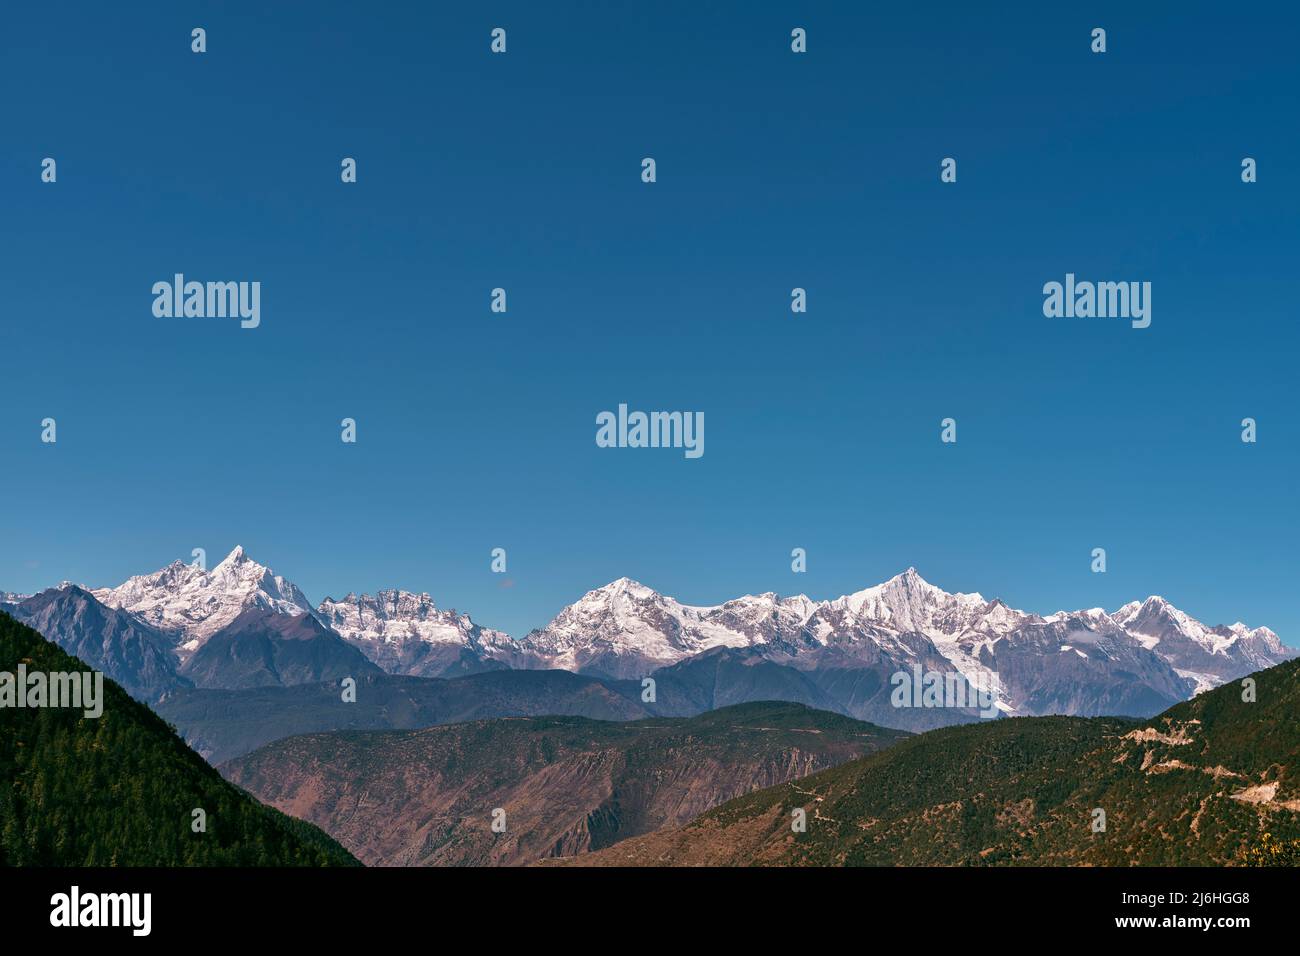 snow capped meili mountain range under blue sky in china's sichuan province Stock Photo